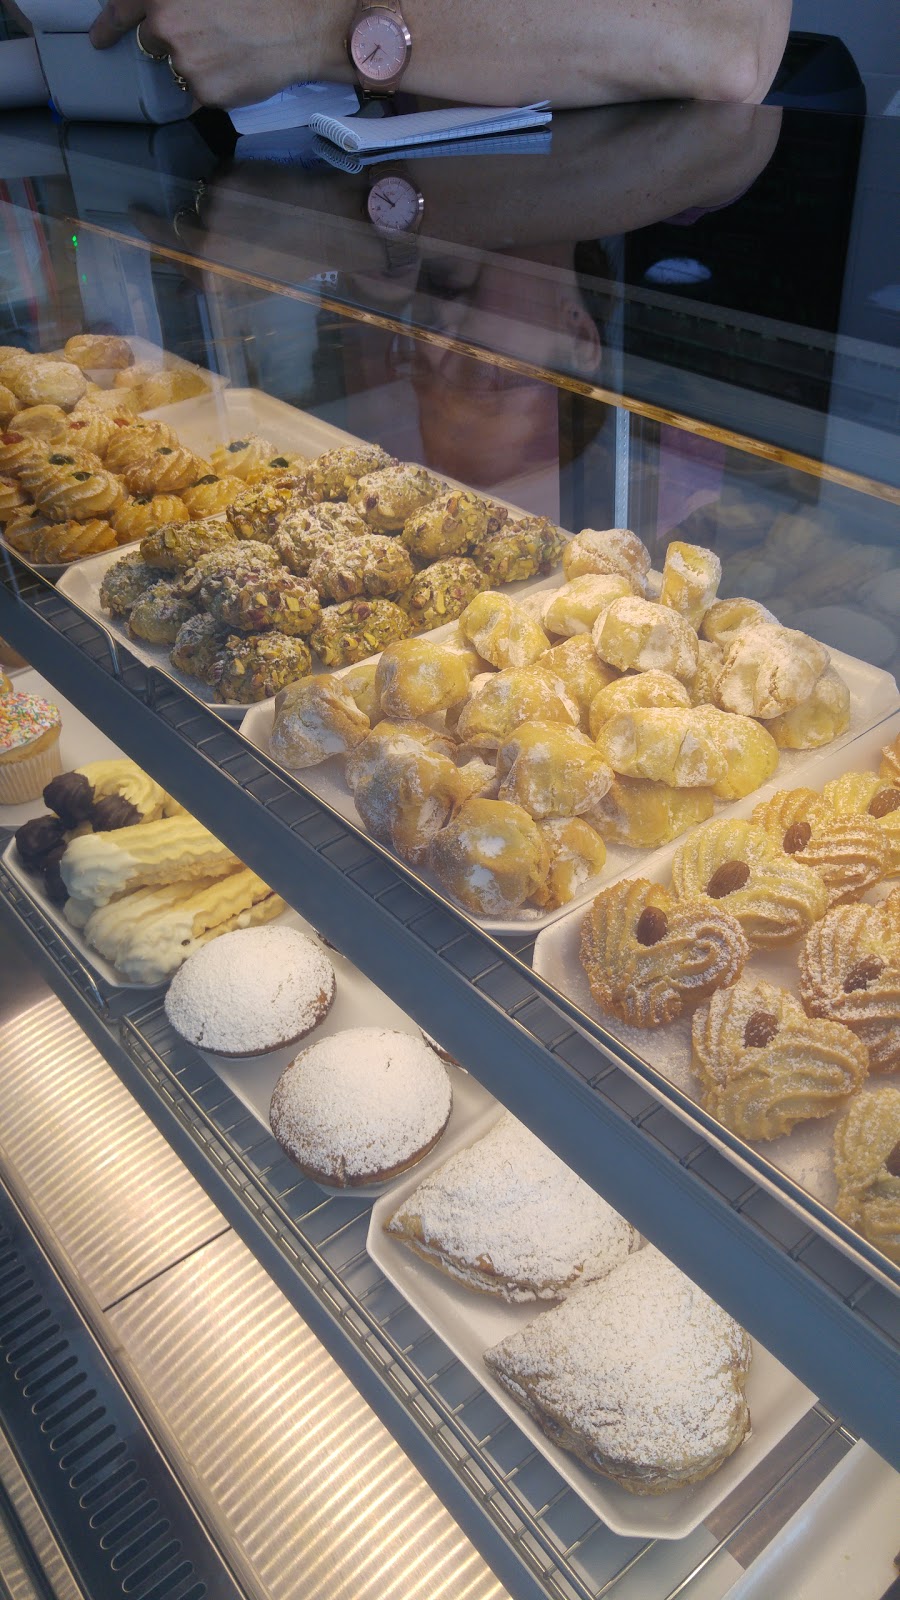 Dolcini Cakes | cafe | 3/44 Harden St, Canley Heights NSW 2166, Australia | 0297573003 OR +61 2 9757 3003